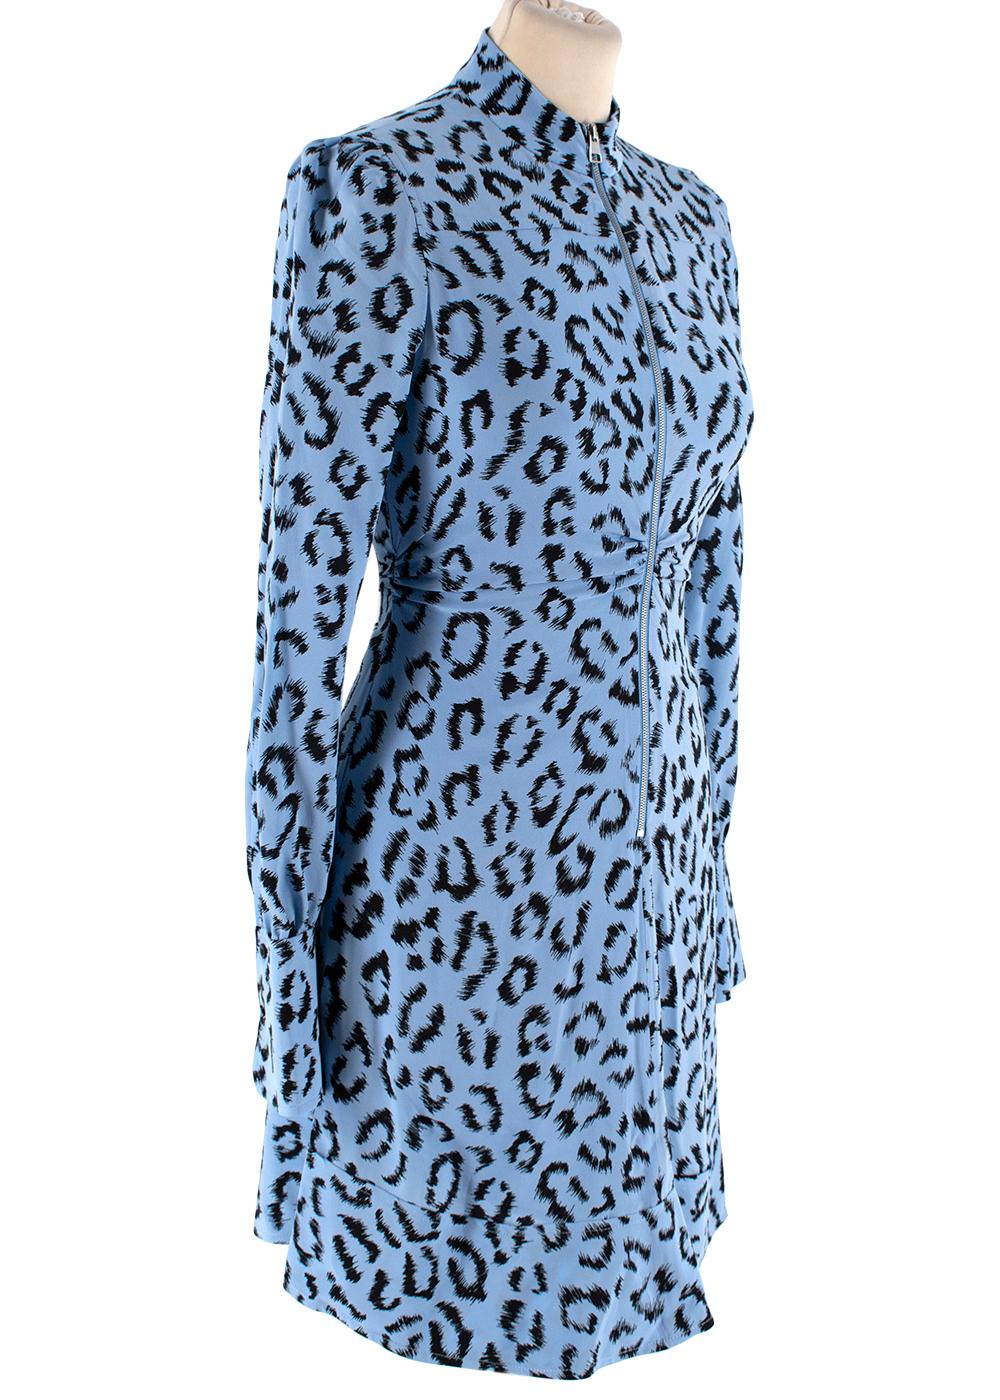 A.L.C. Blue Animal Print Zip Front Silk Mini Dress

-Graphical animal print 
-Luxurious soft silk fabric 
-Long sleeve with buttoned cuffs 
-Metal zip fastening to the front 
-Raised collar 
-Ruffled detail to the waist 
-Flared skirt with bottom